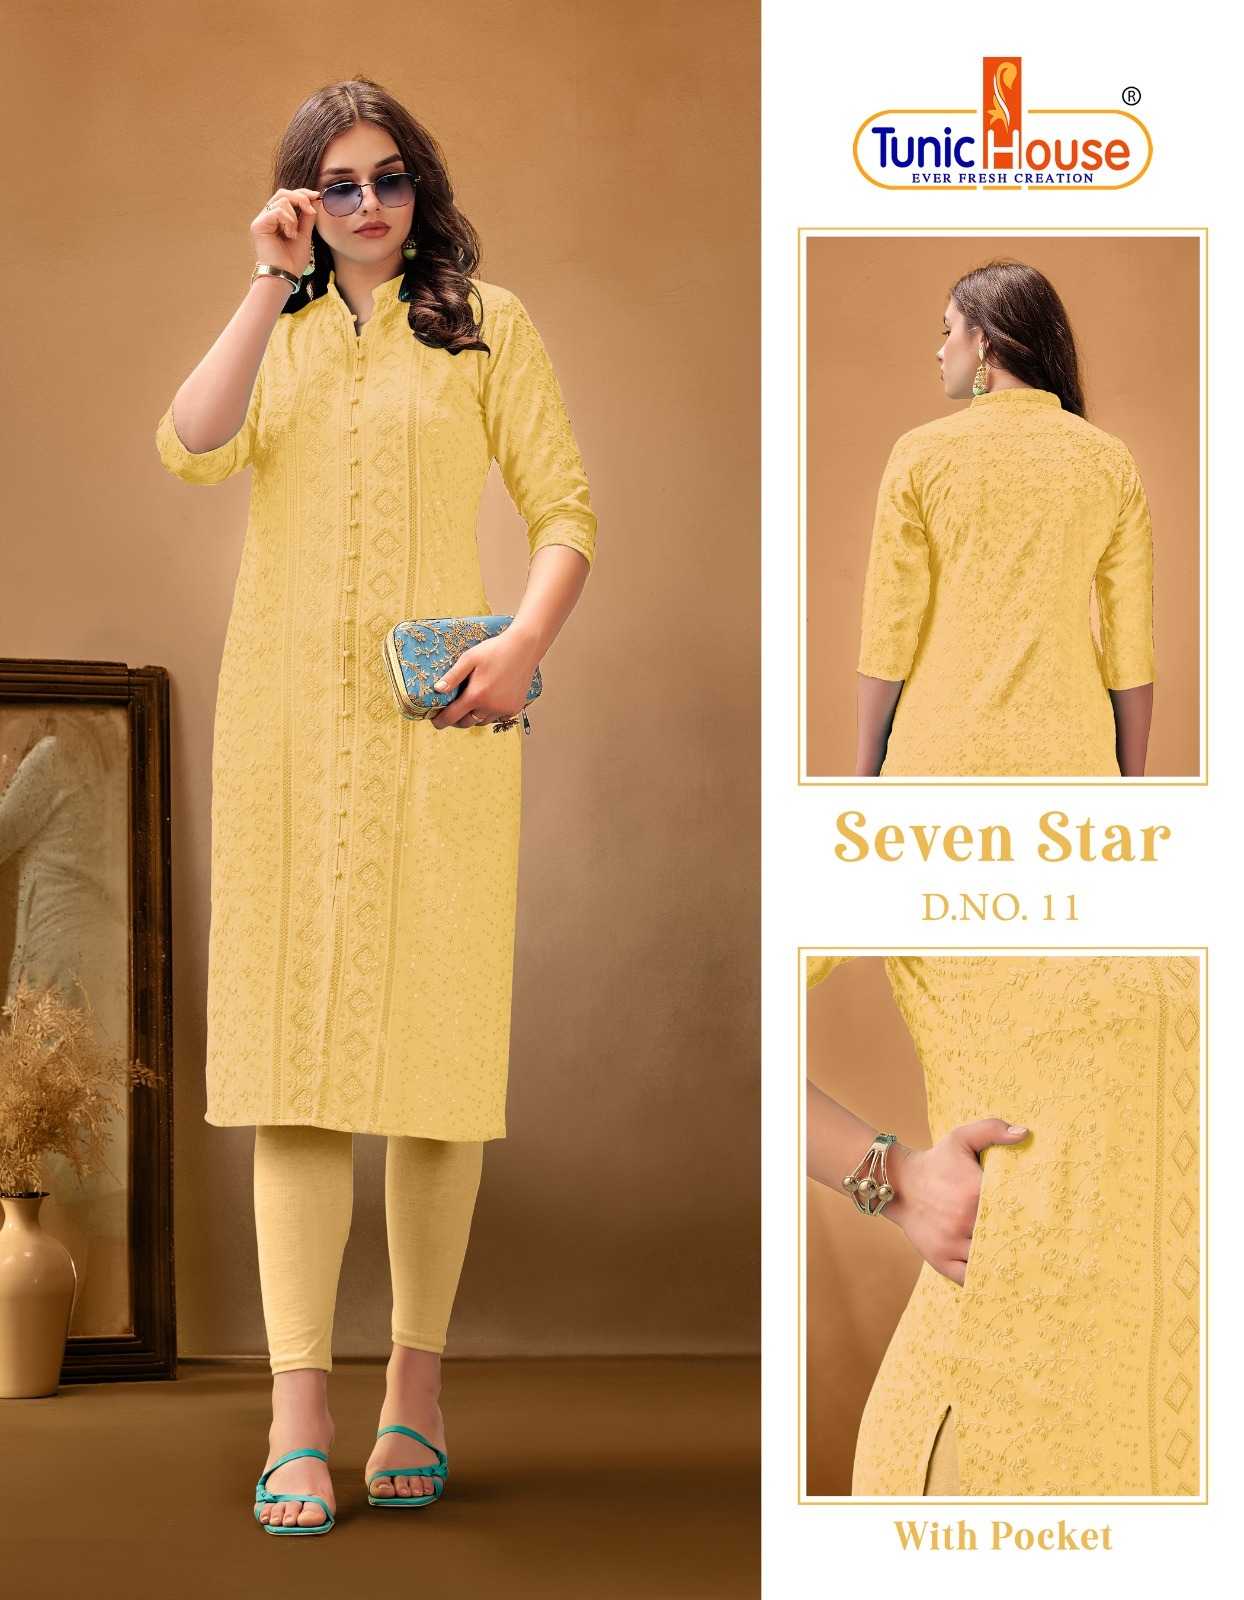 Tunic Houes 7 Star collection 14